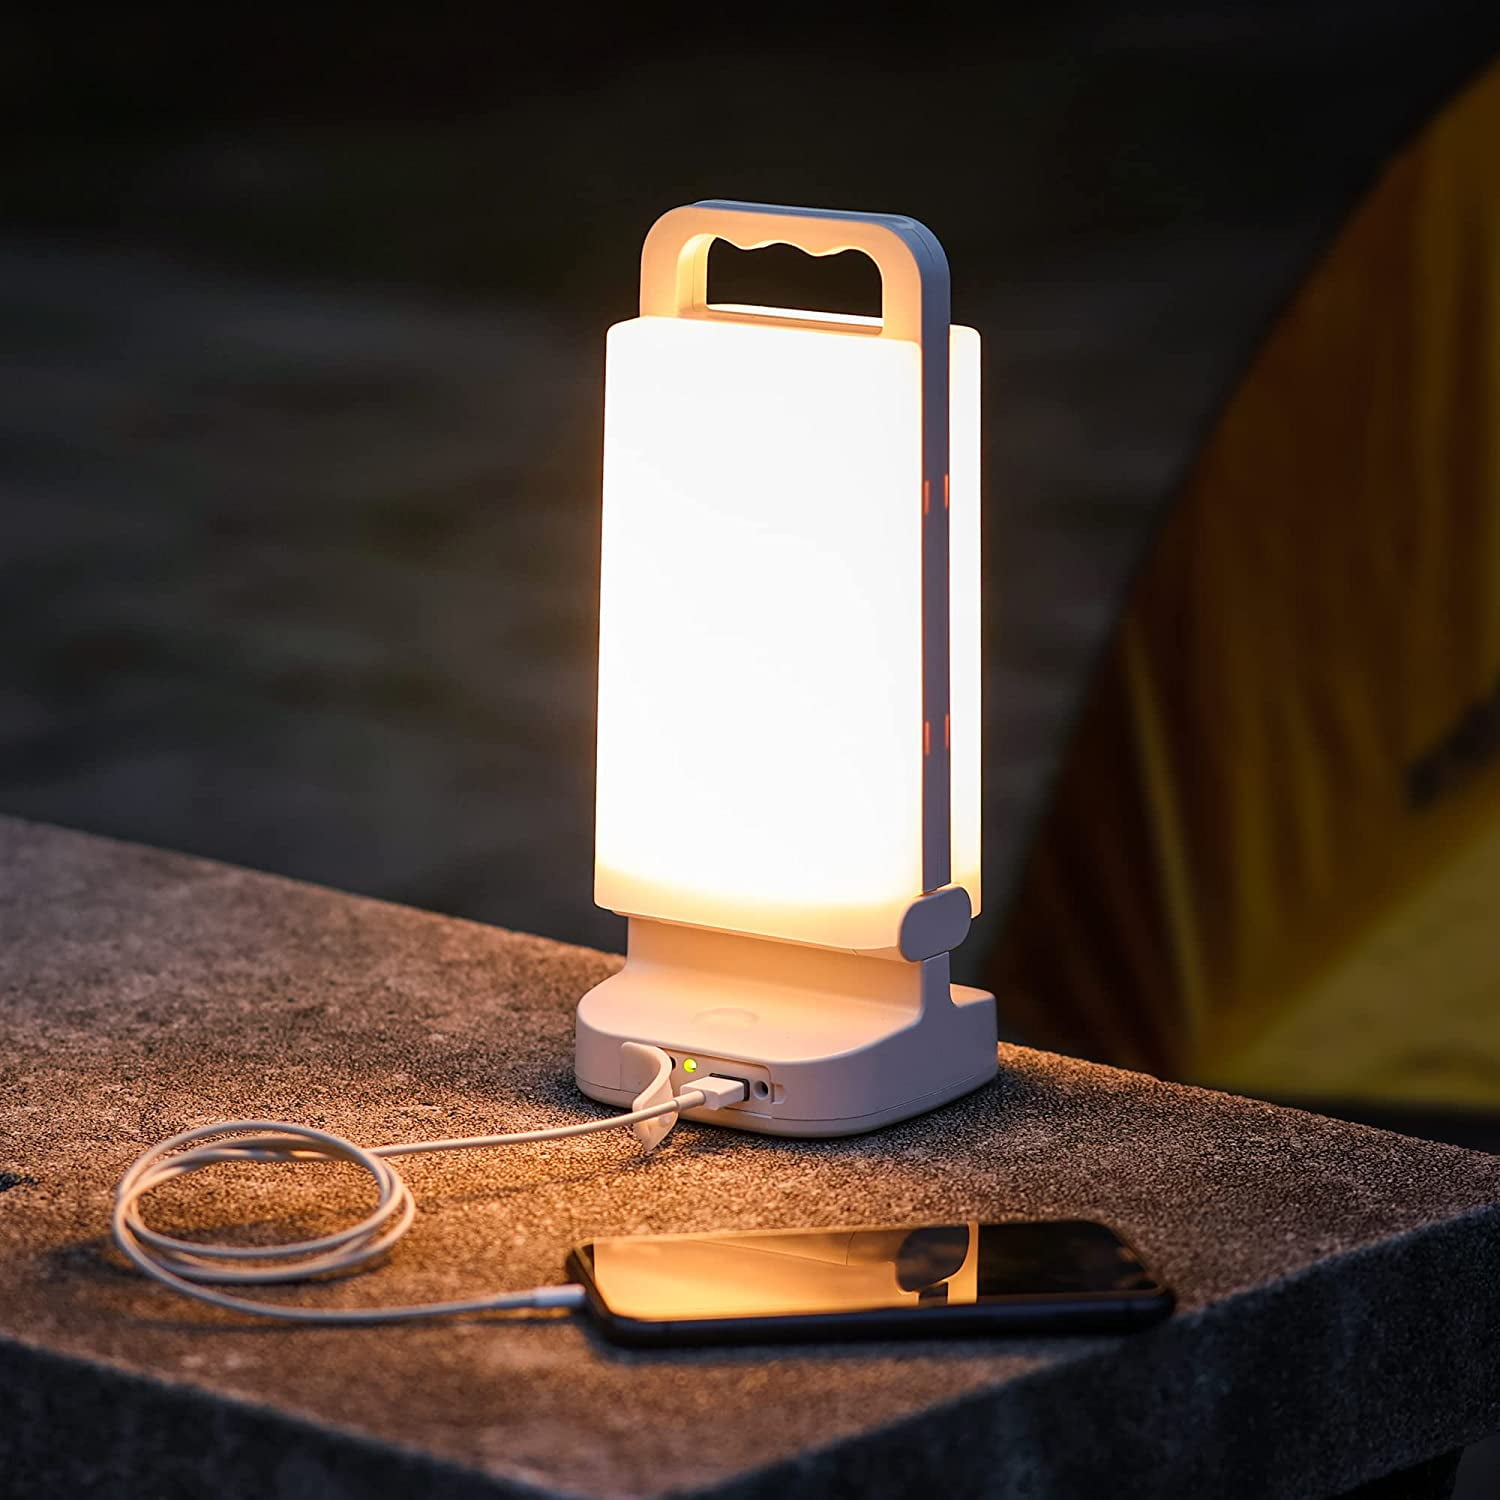 1/2pcs Portable 360 Degree Solar Lamps USB Charger Camping Lantern Lamp LED  Rechargeable Outdoor Lighting Folding Camp Tent Lamp